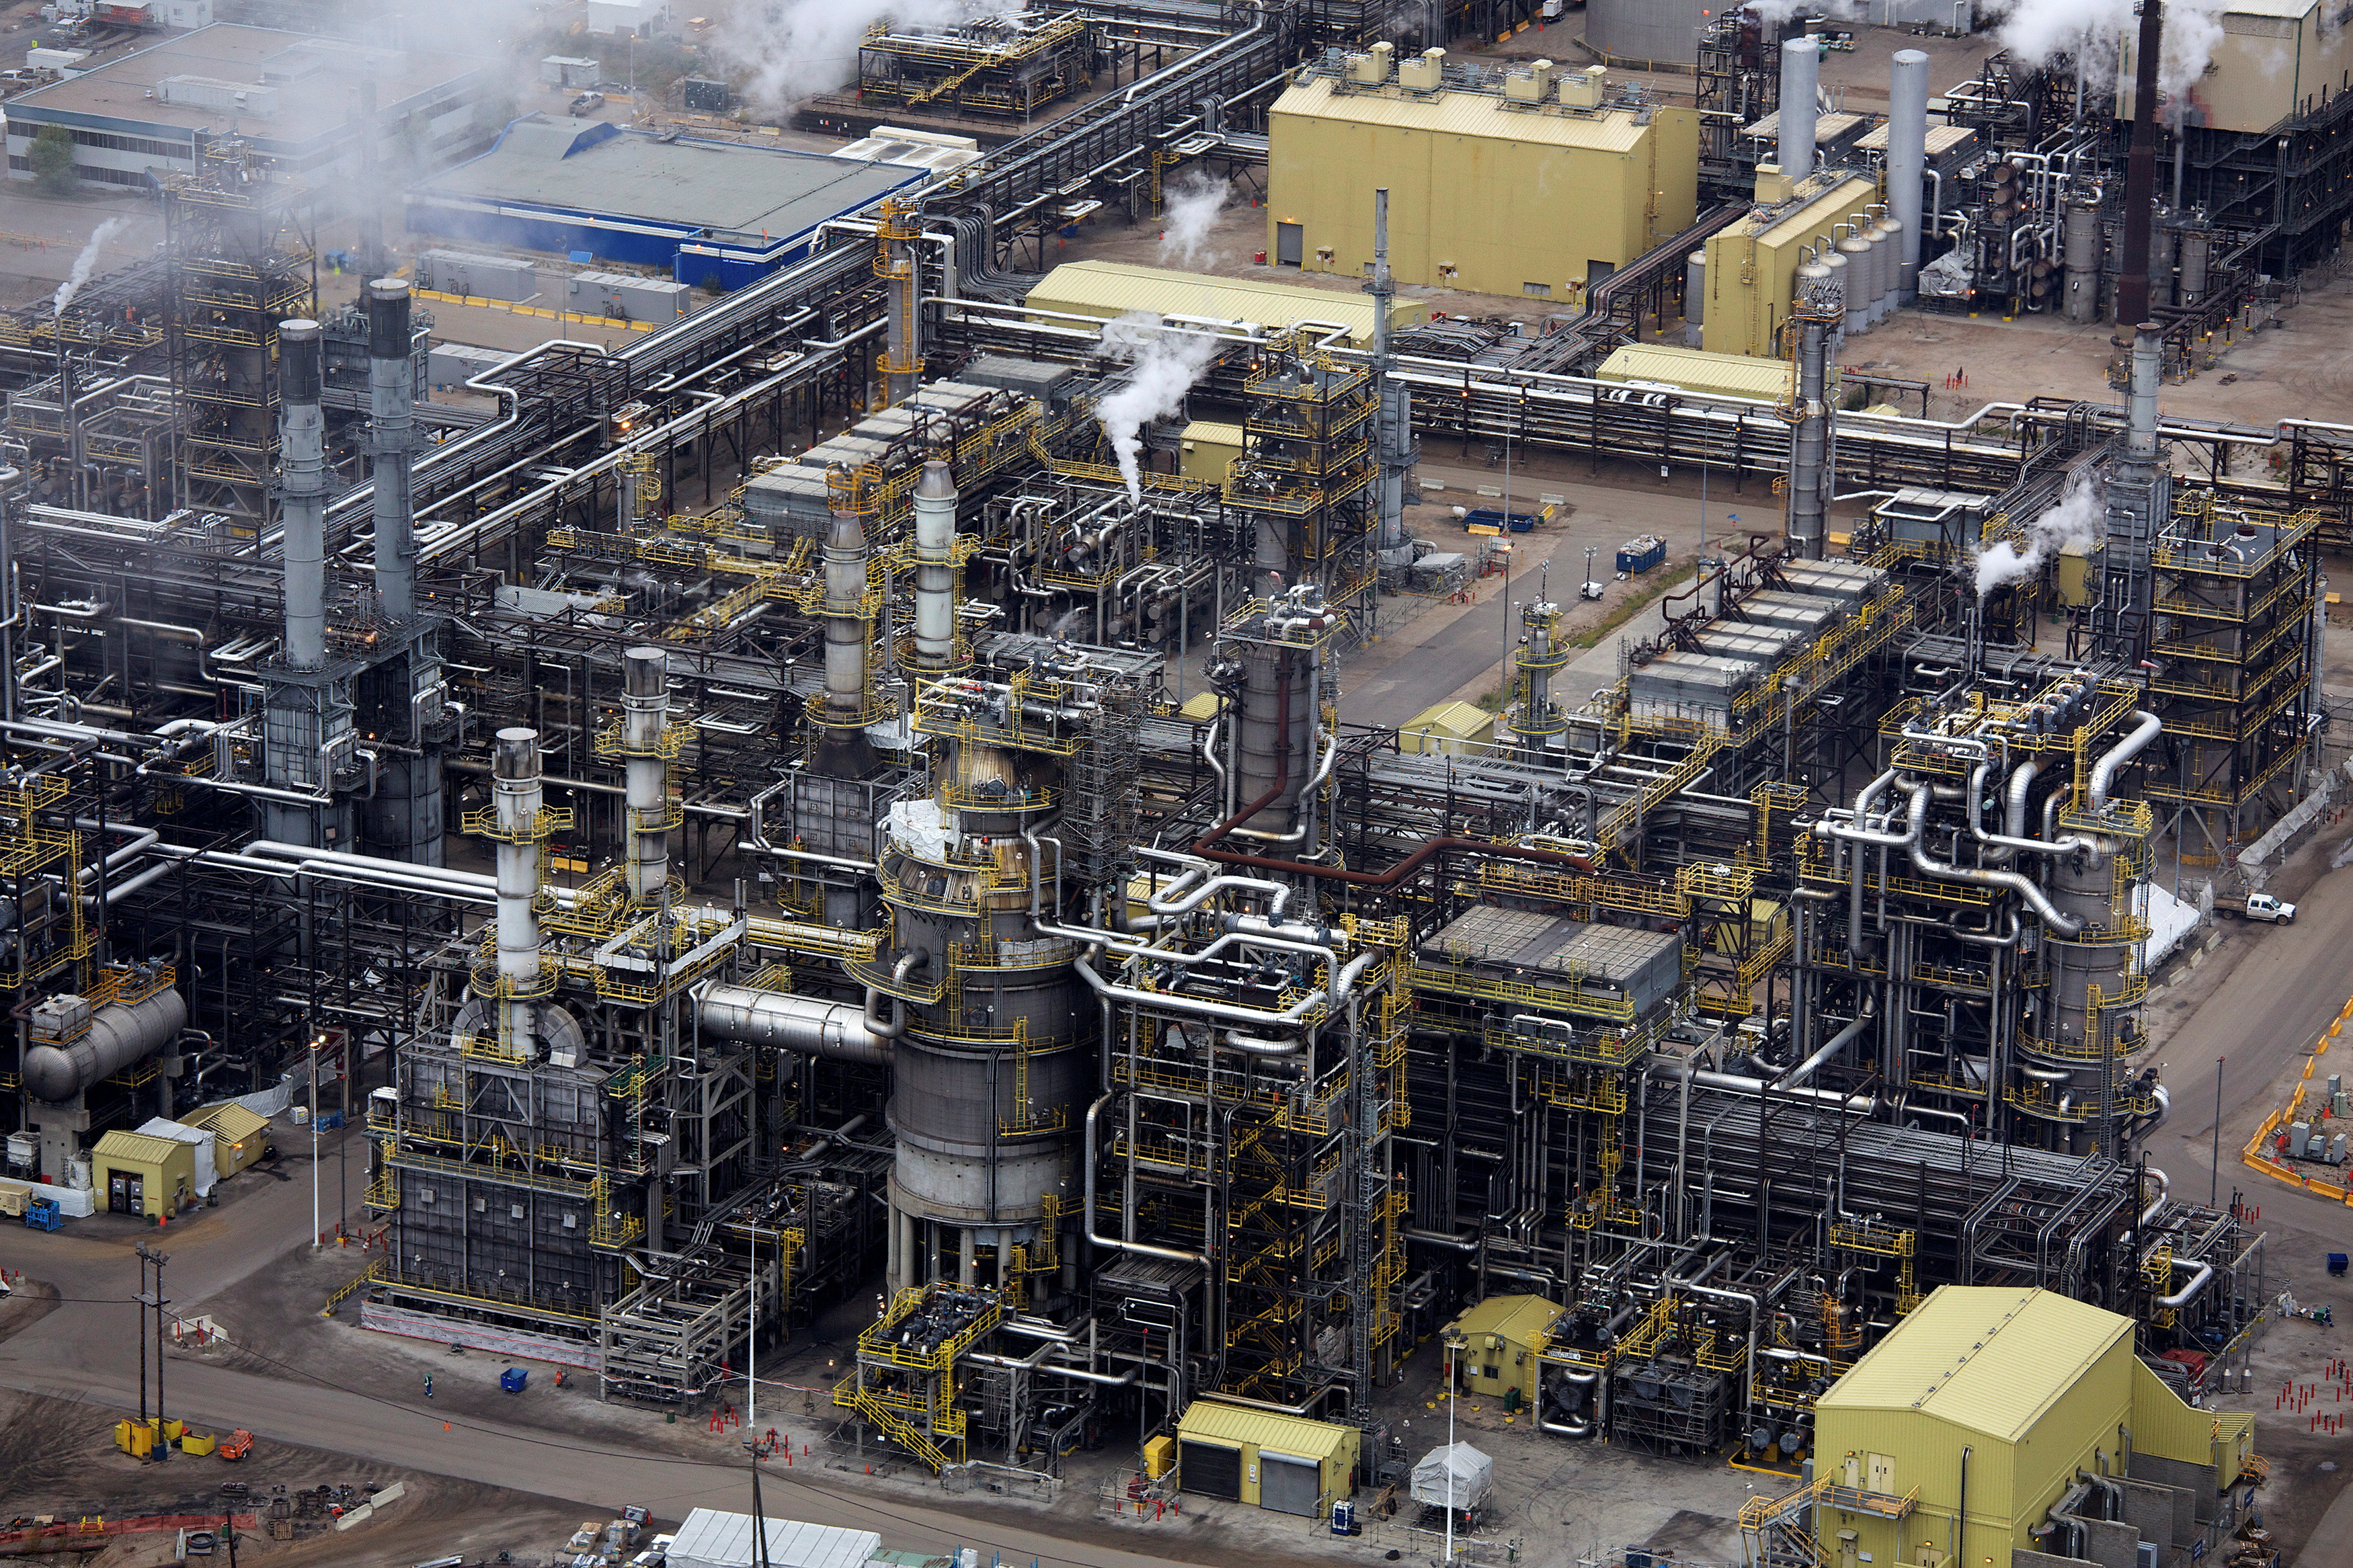 The processing facility at an oil sands operations near Fort McMurray.